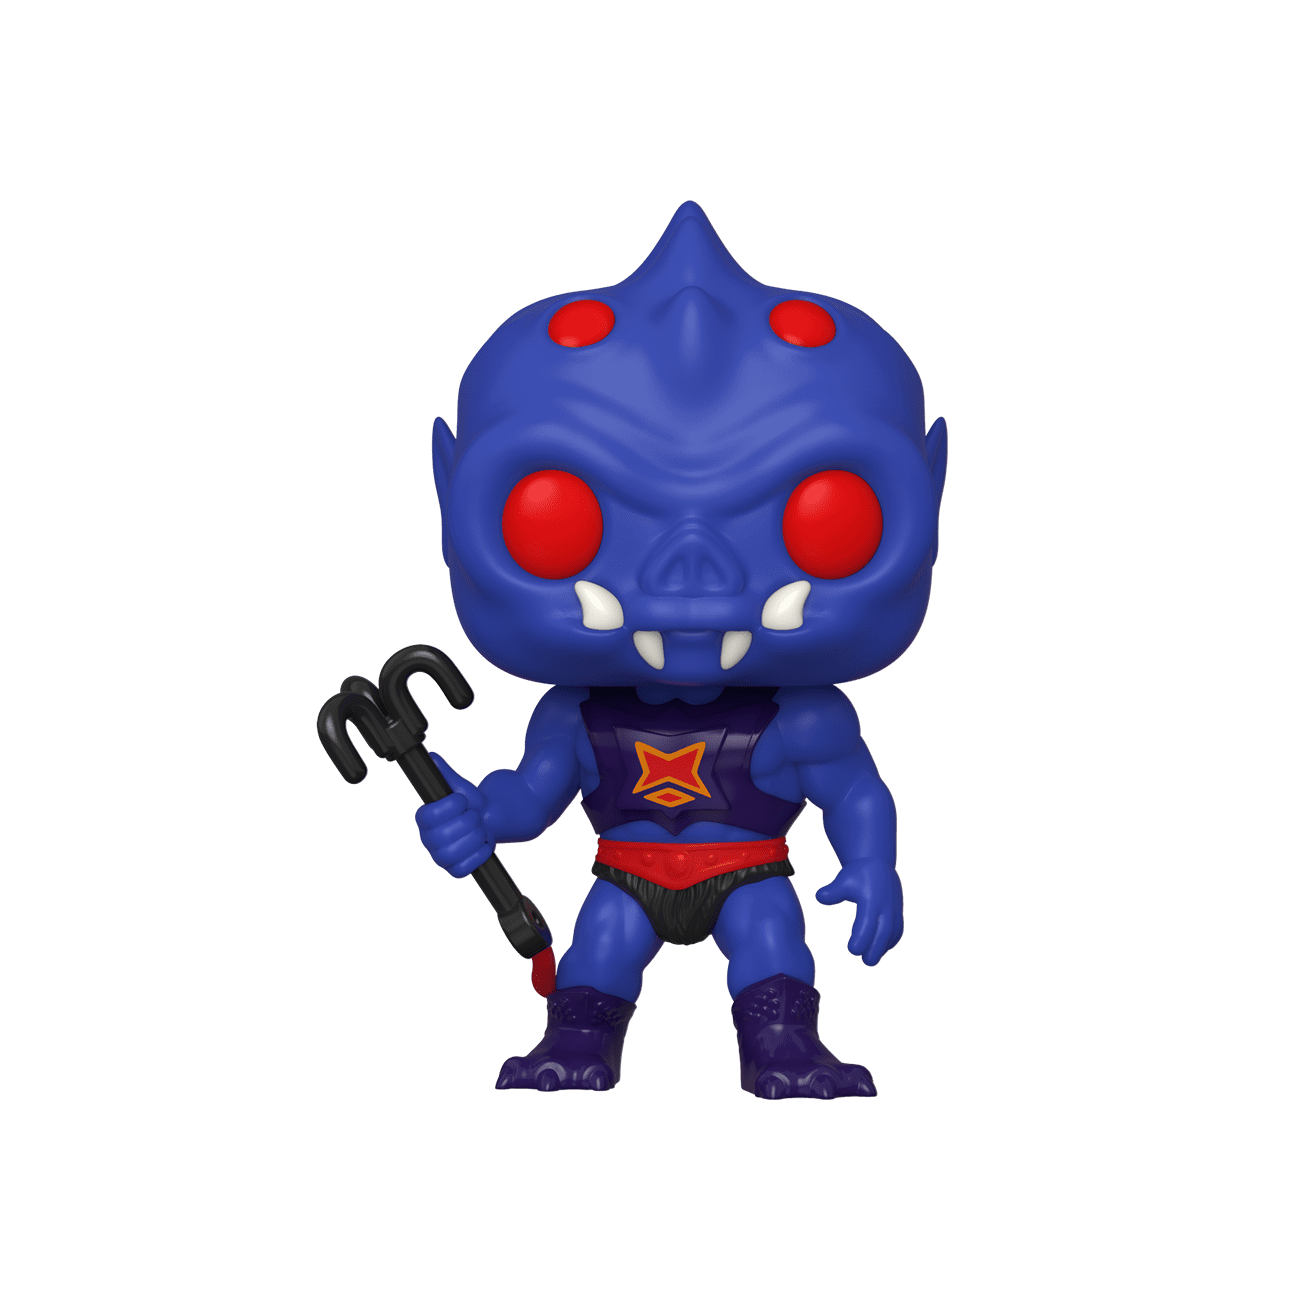 Funko Shop Exclusive *SOLD OUT* BLUE Funko Pop MER-MAN Master of the Universe